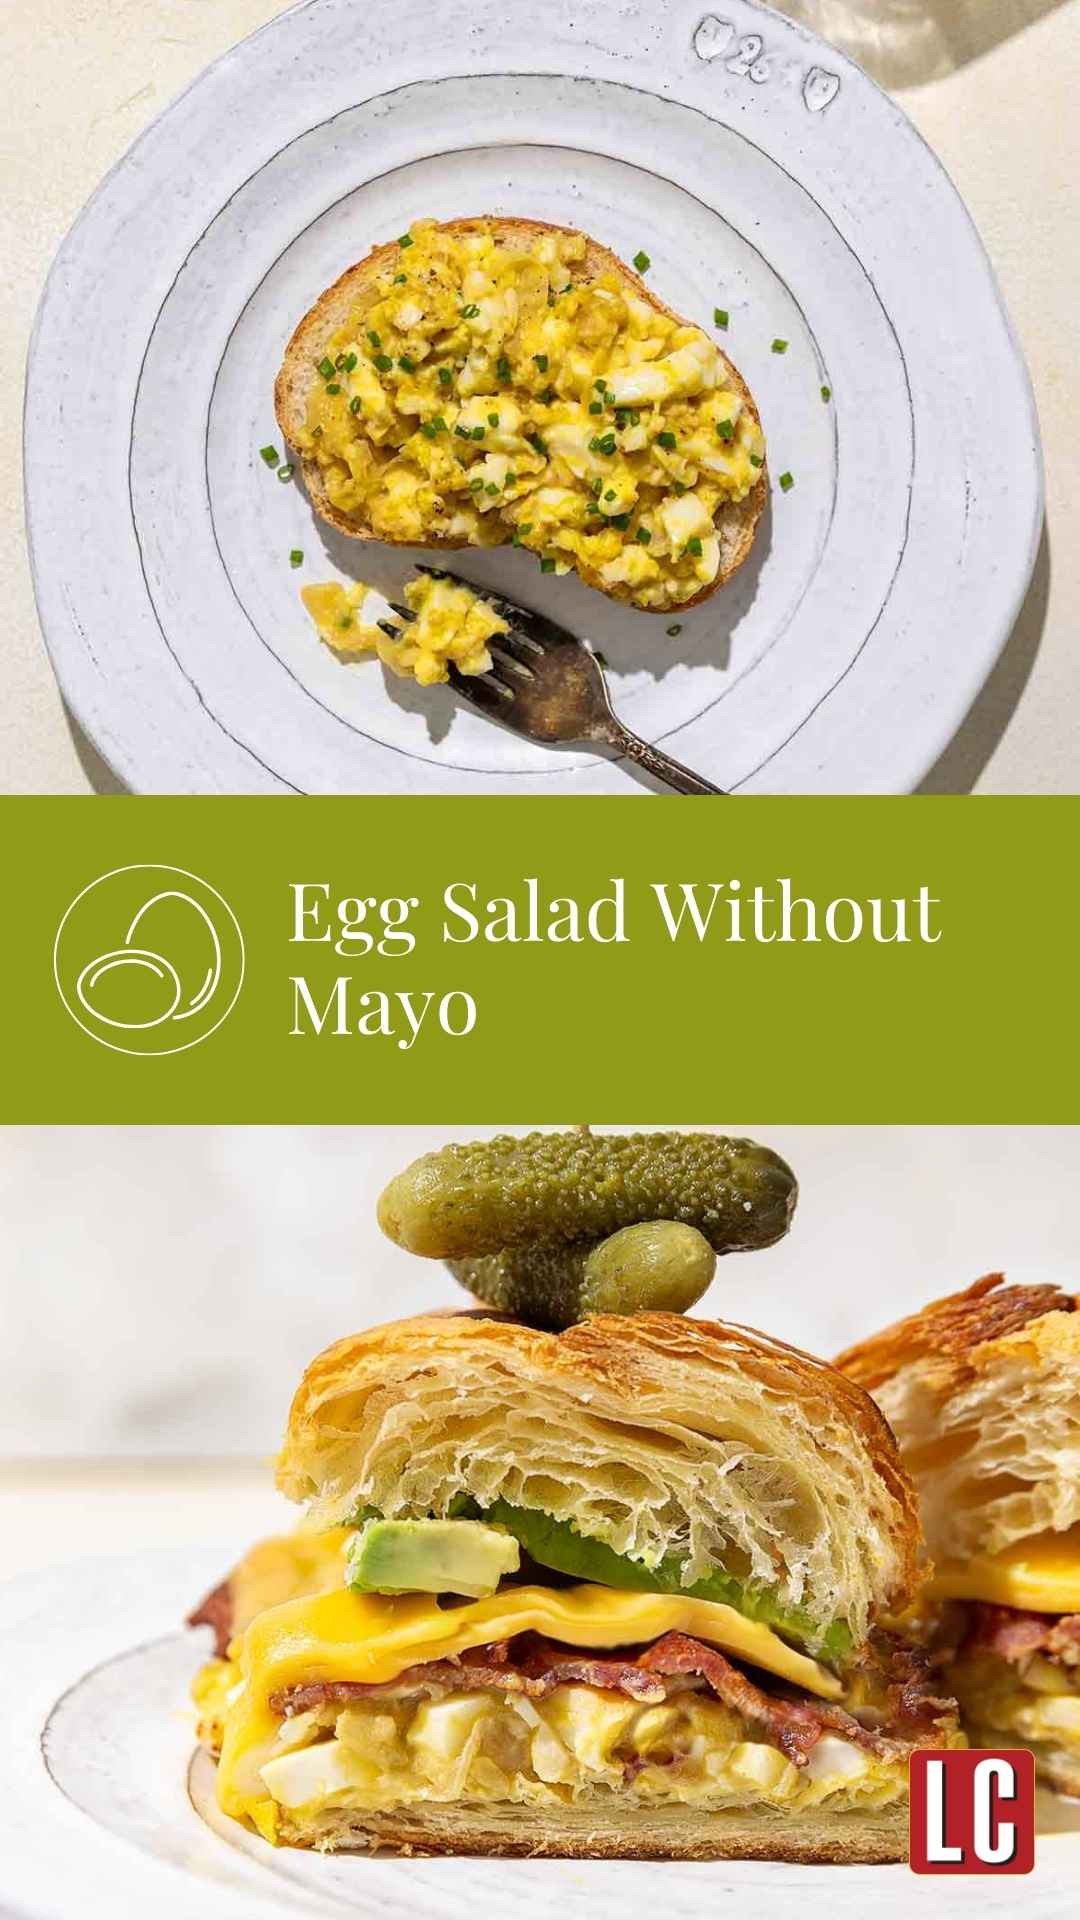 An open-faced egg salad sandwich topped with minced chives on a white plate and a halved croissant sandwich with egg salad, bacon, cheese, avocado, and small pickles on a white plate.